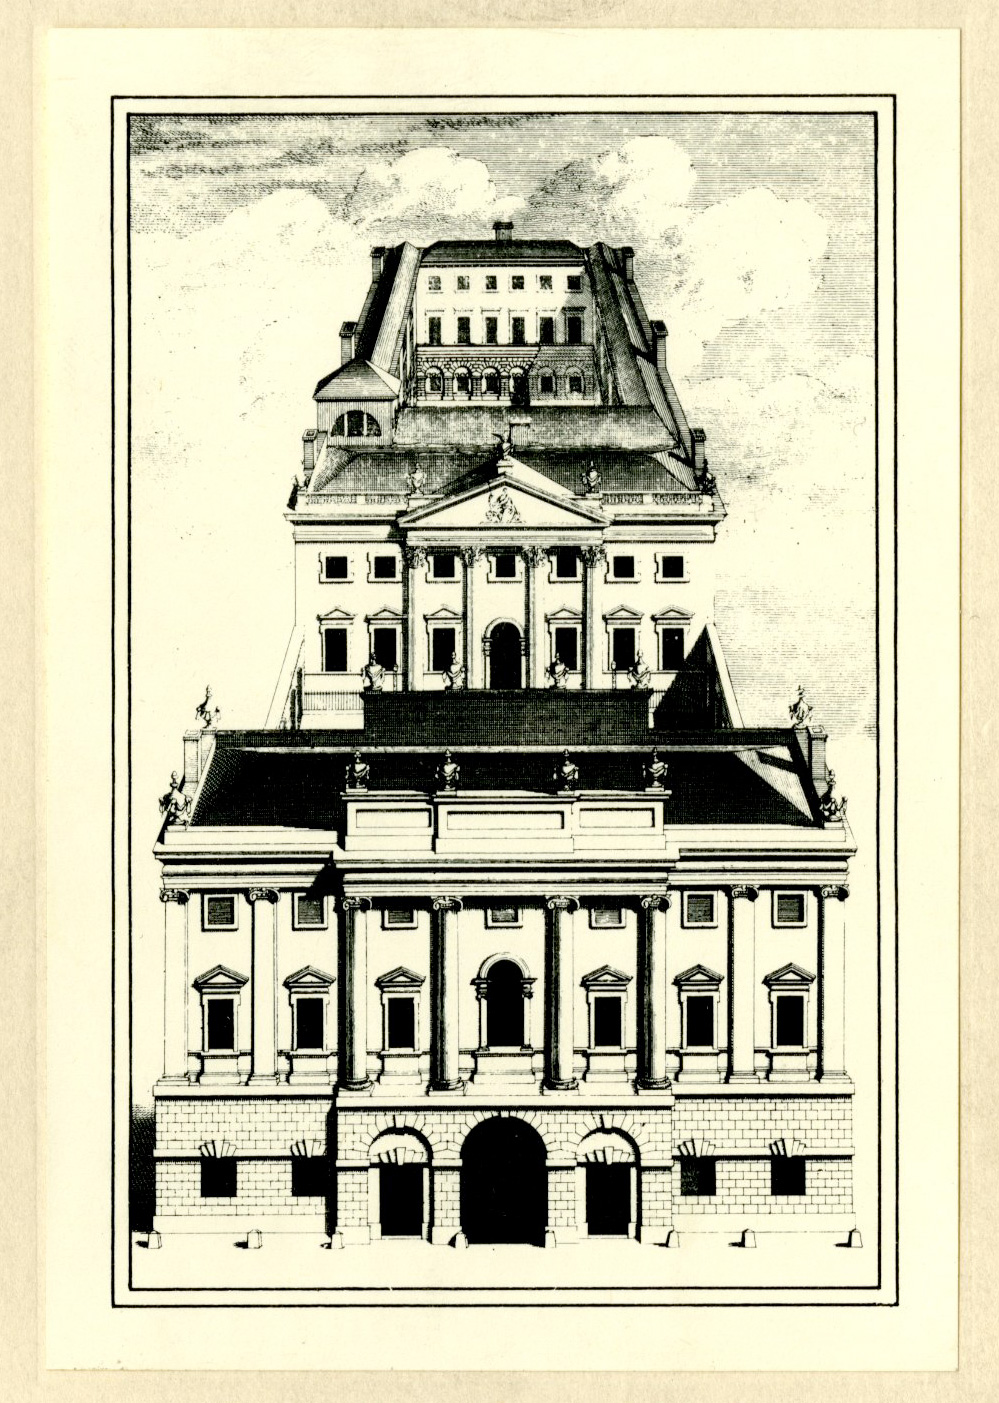 Exterior design of the Bank of England building